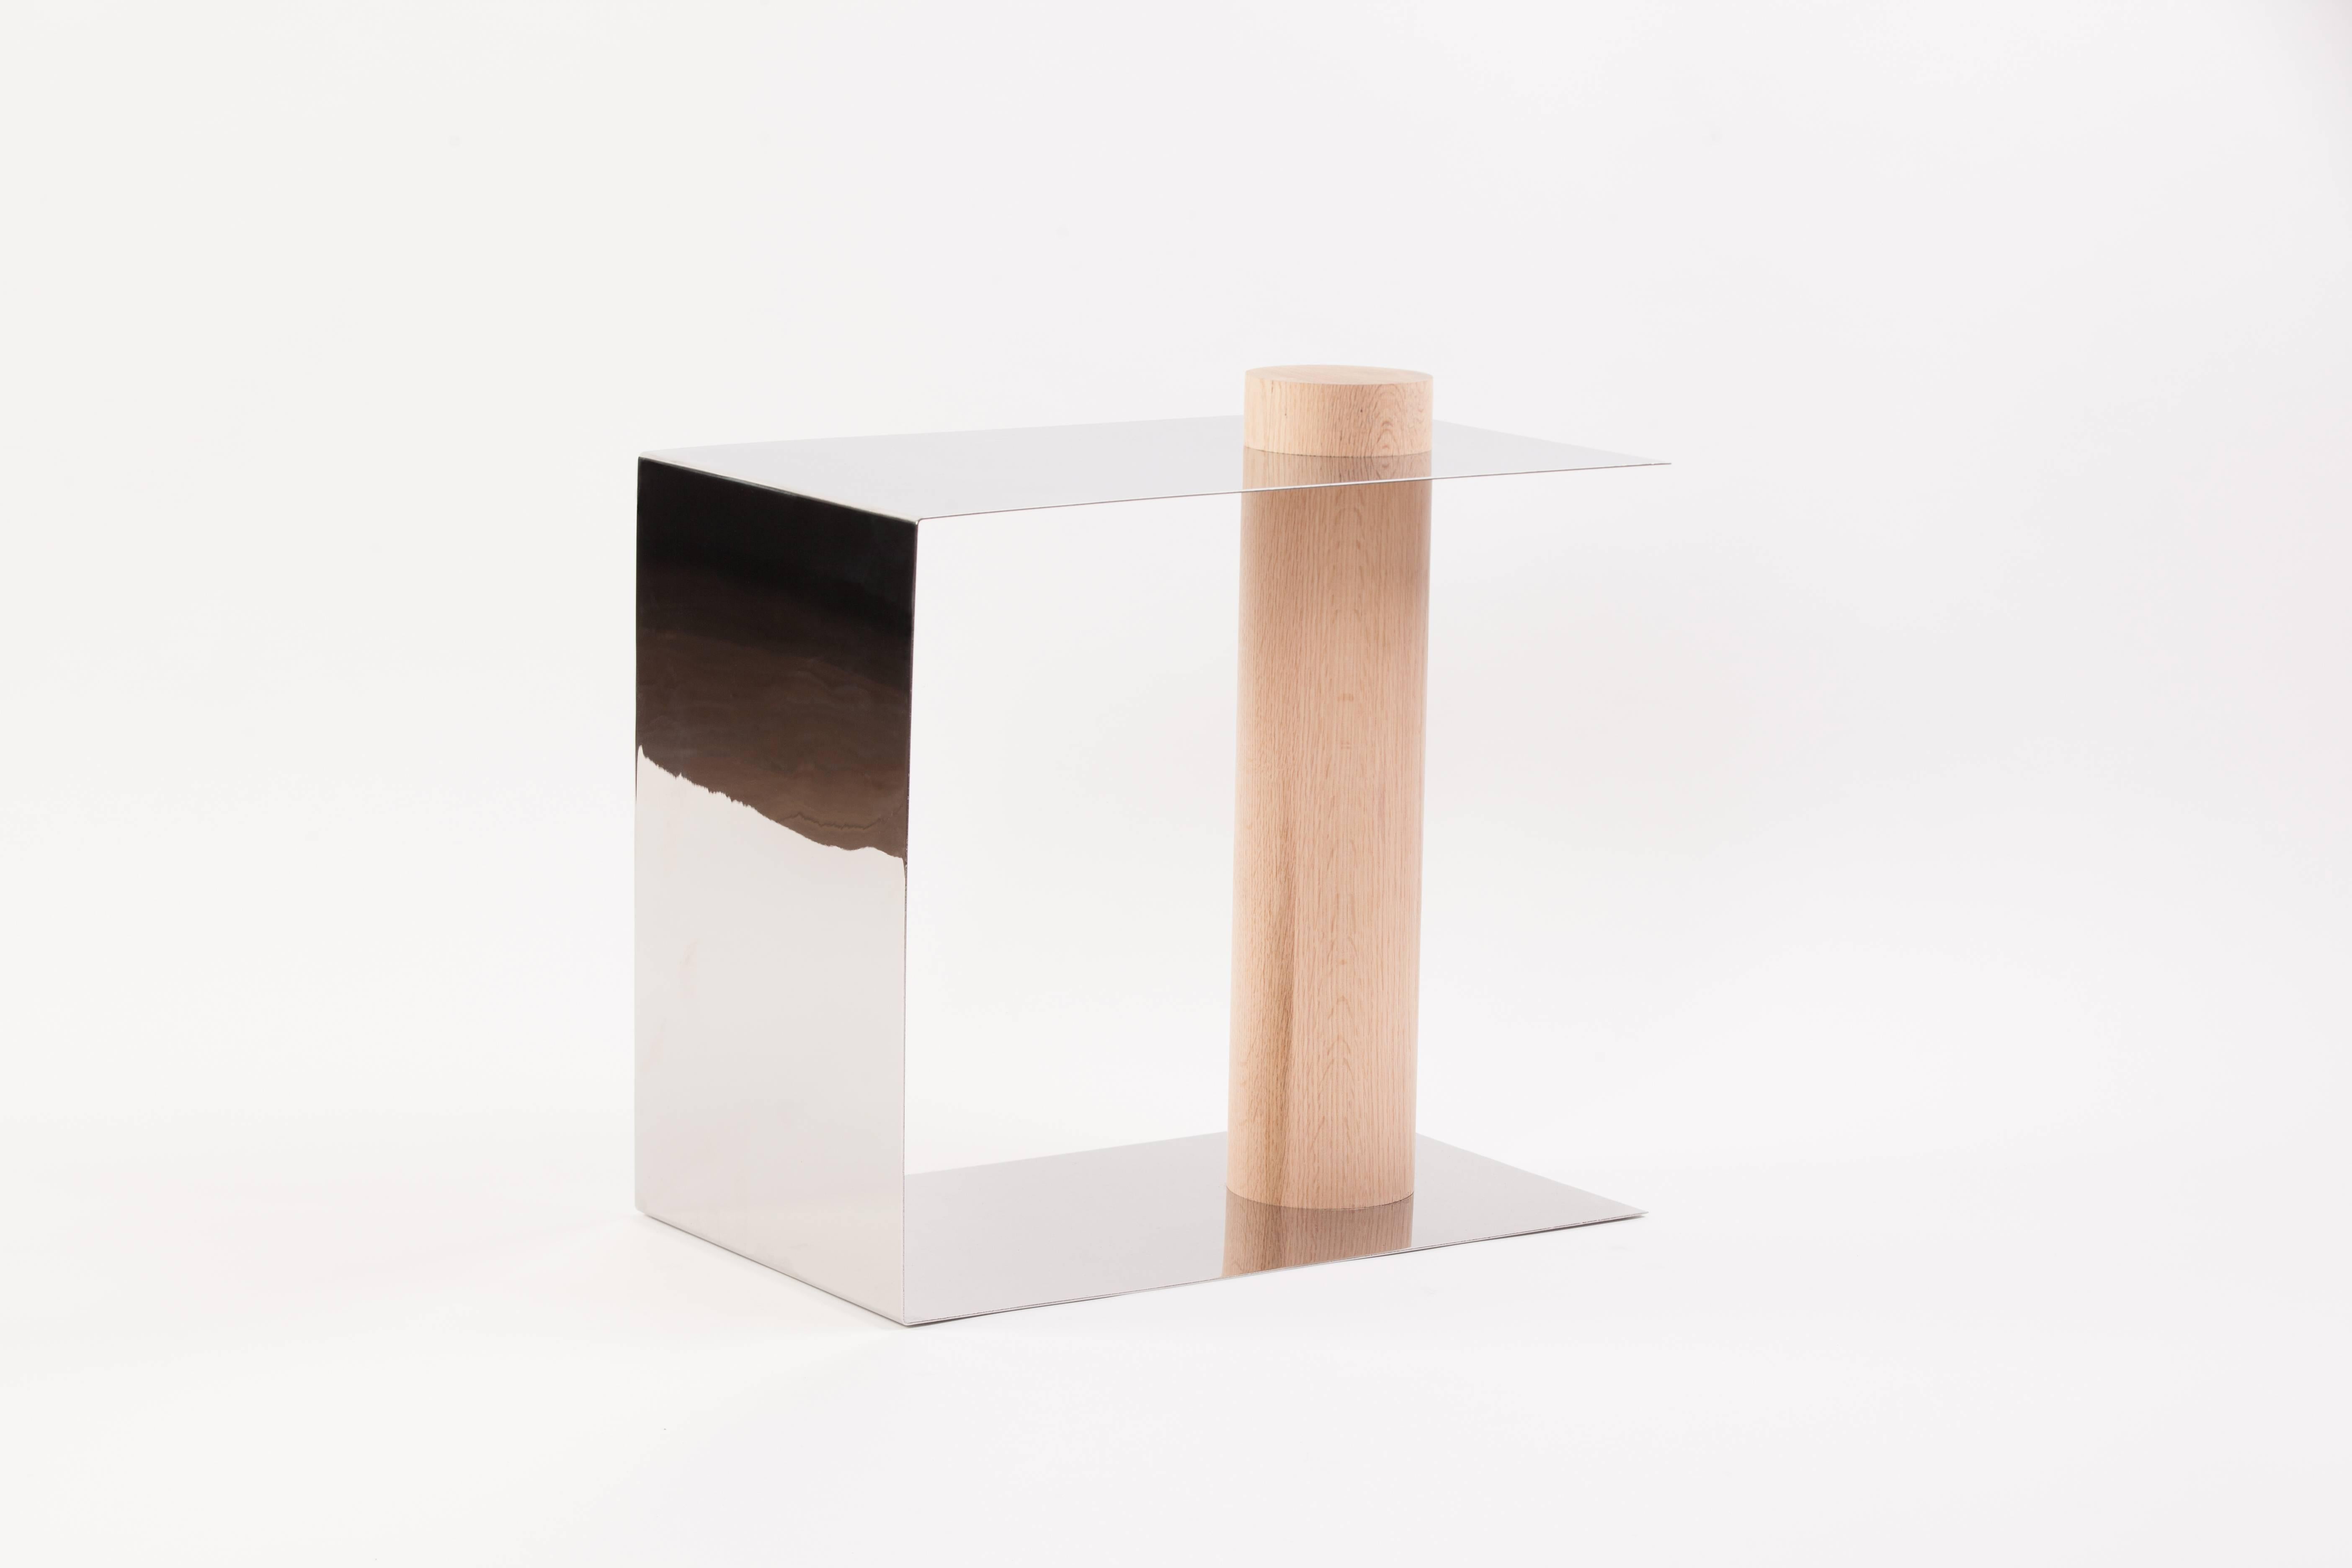 Puru is a modern side table, in mirrored polished stainless steel and white oak. The concept of the beauty of simplicity was the inspiration behind the Puru side table. Two elements are expressed by two materials. Deriving its name from the Japanese